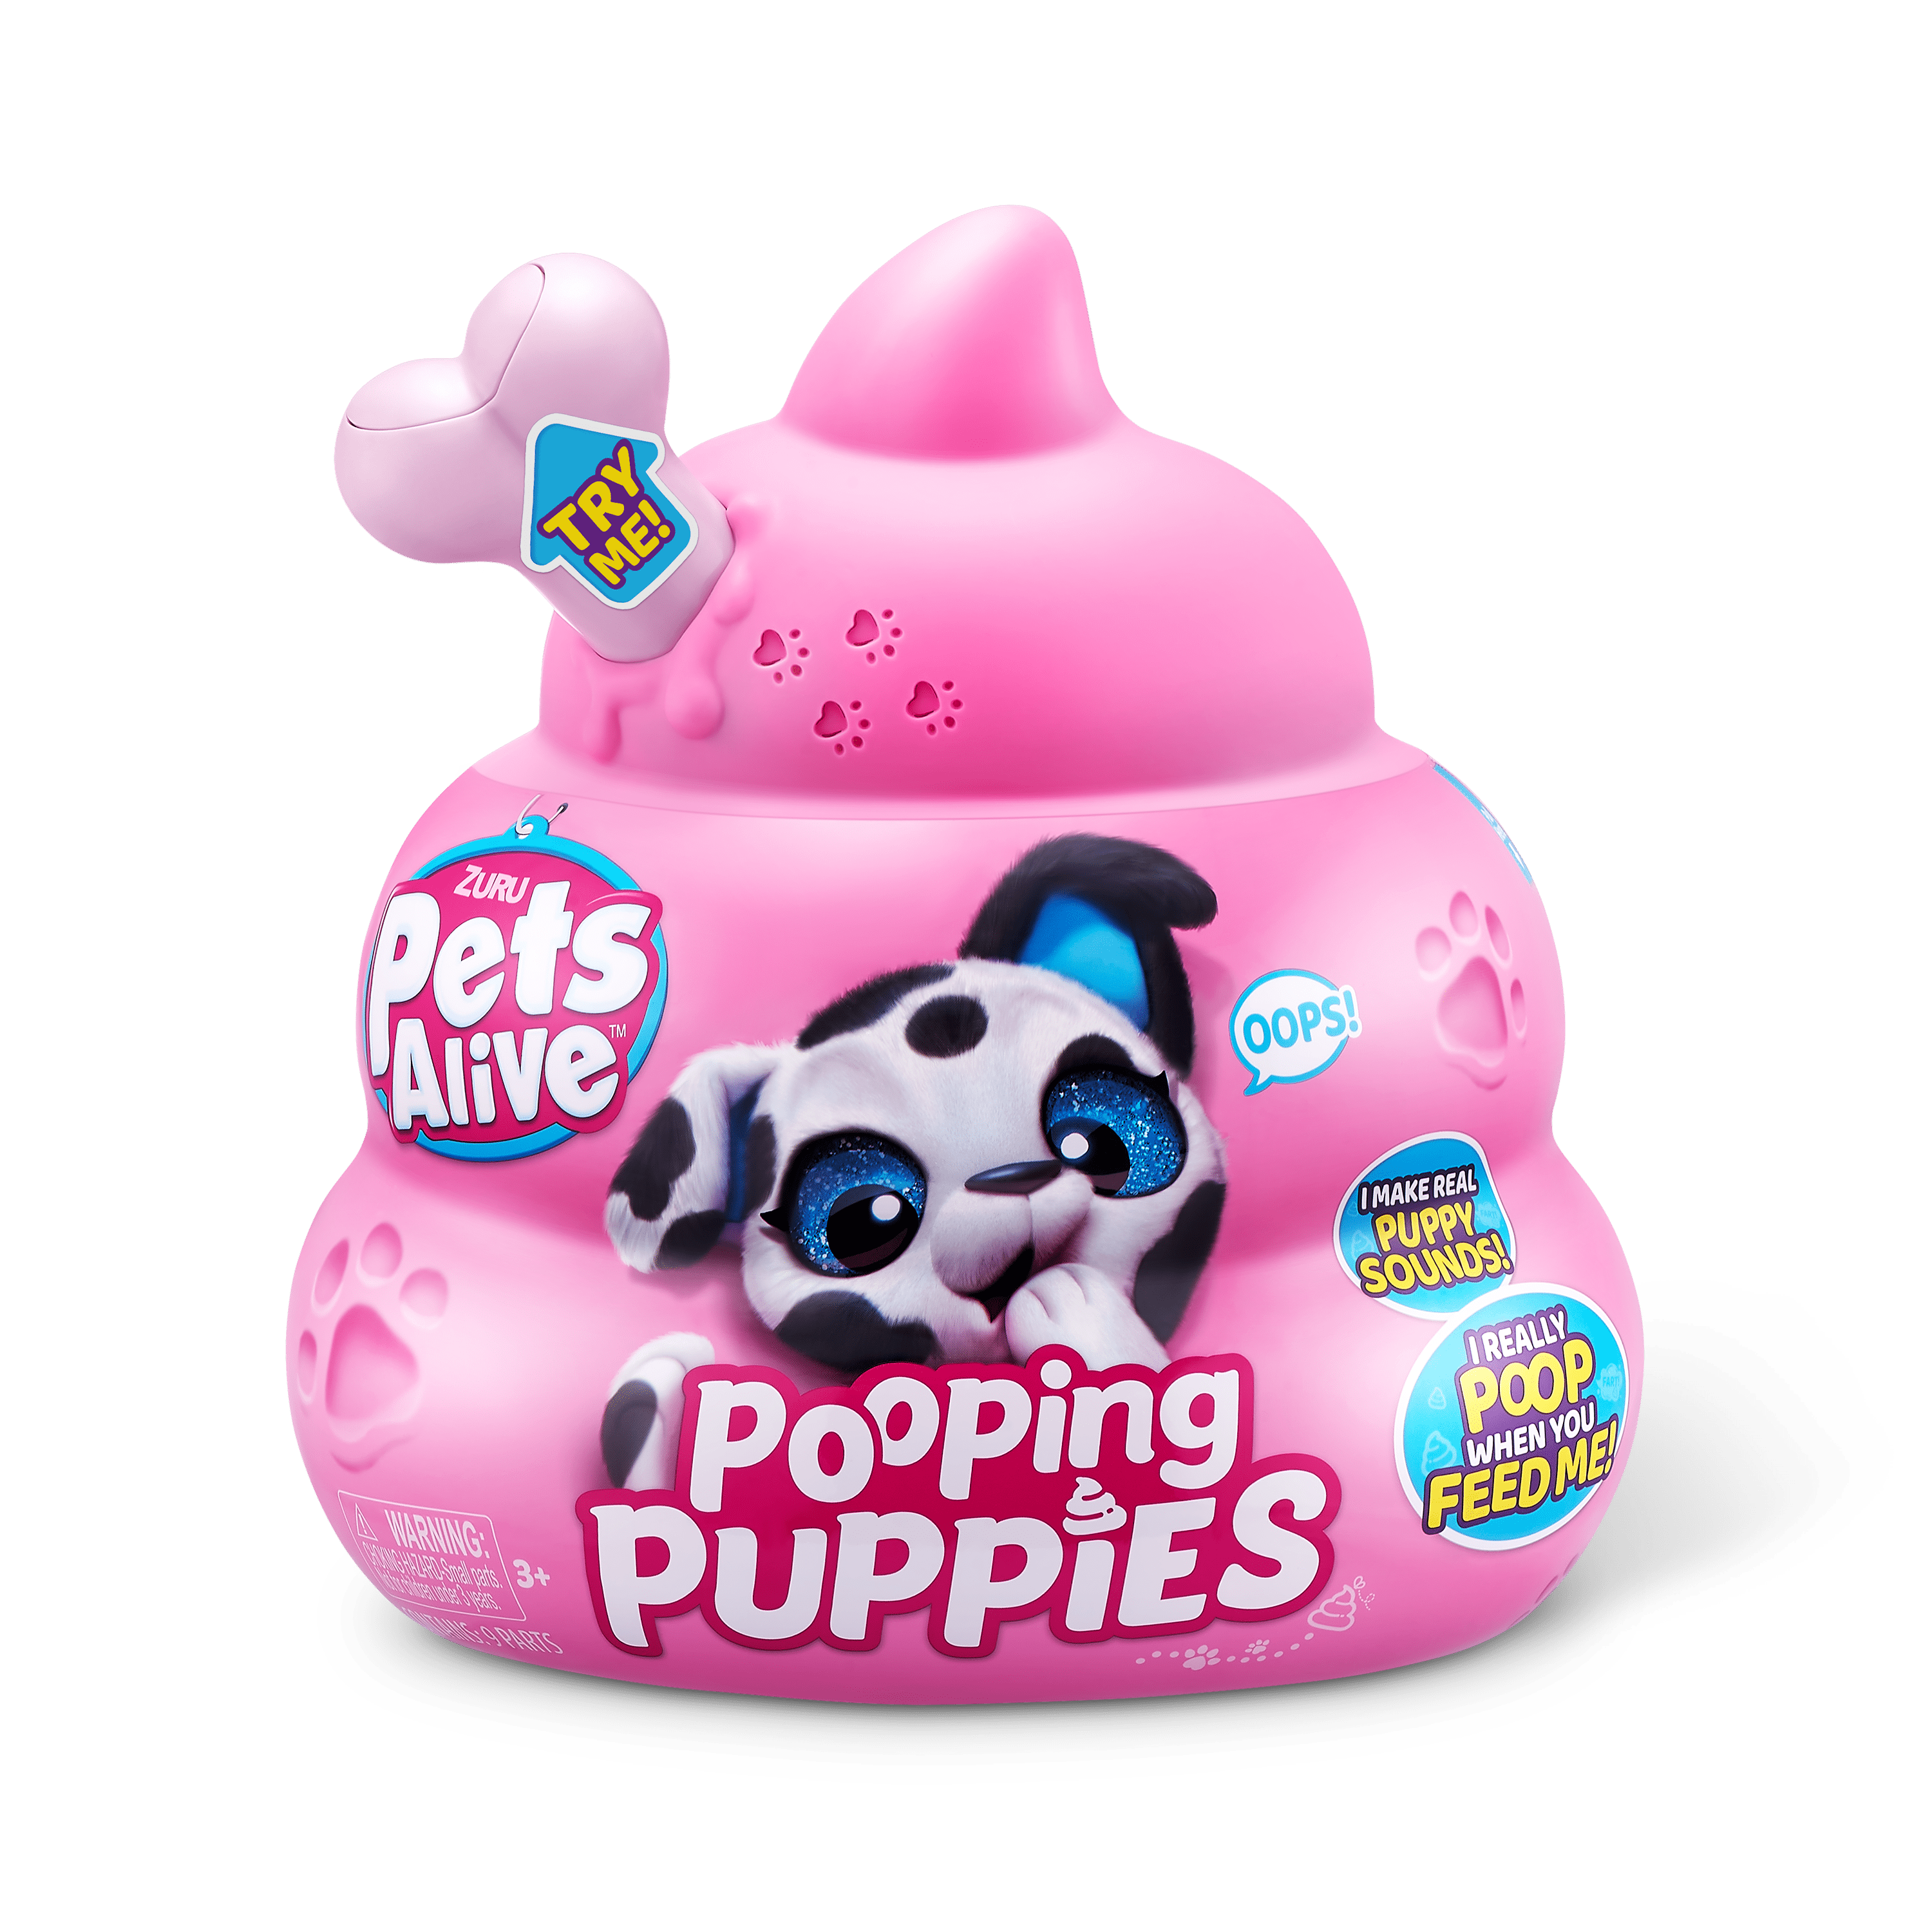 Littlest Pet Shop Party Spectacular Collector Pack Toy, Includes 15 Pets,  Ages 4 and Up ( Exclusive)